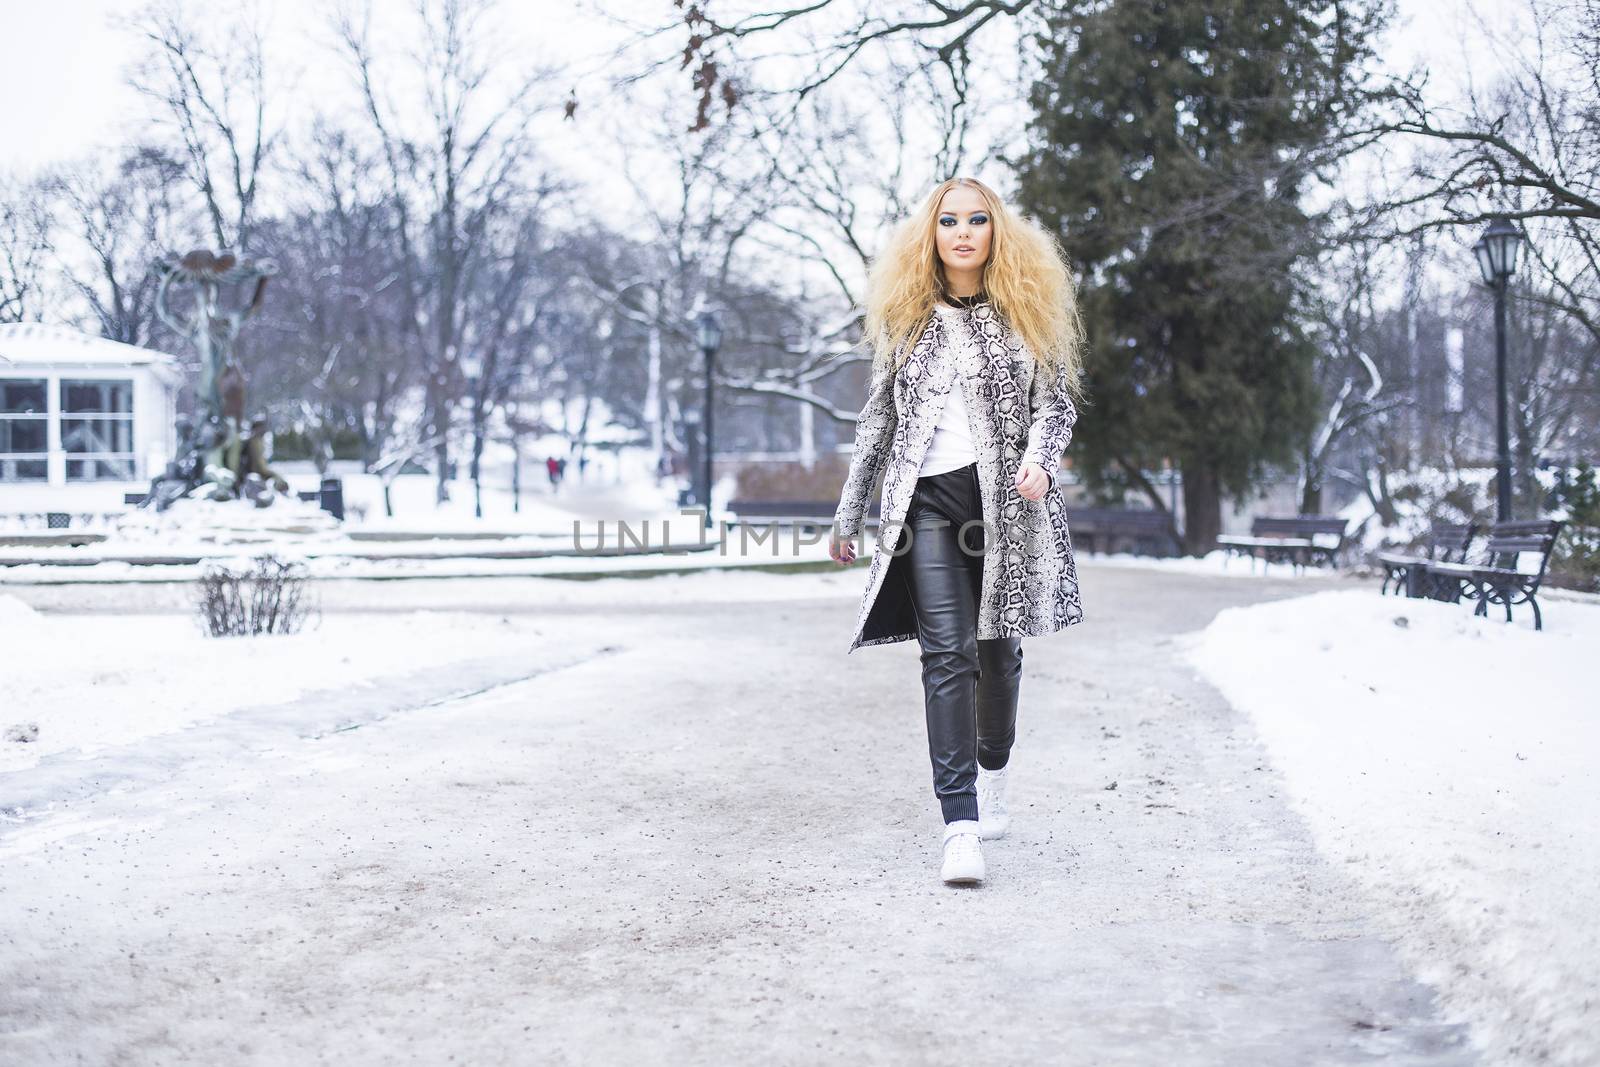 Blonde girl in the park on a winter day by Kor